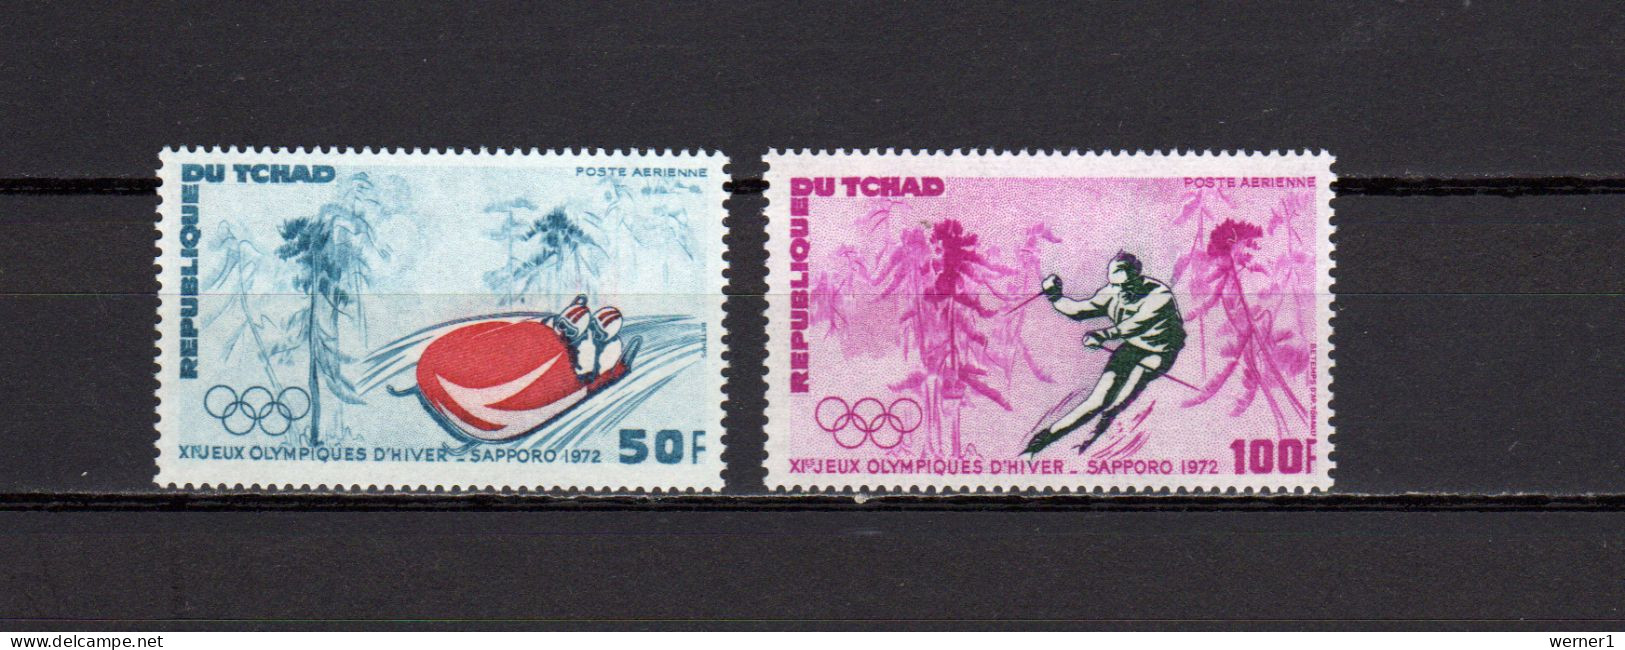 Chad - Tchad 1972 Olympic Games Sapporo Set Of 2 MNH - Inverno1972: Sapporo